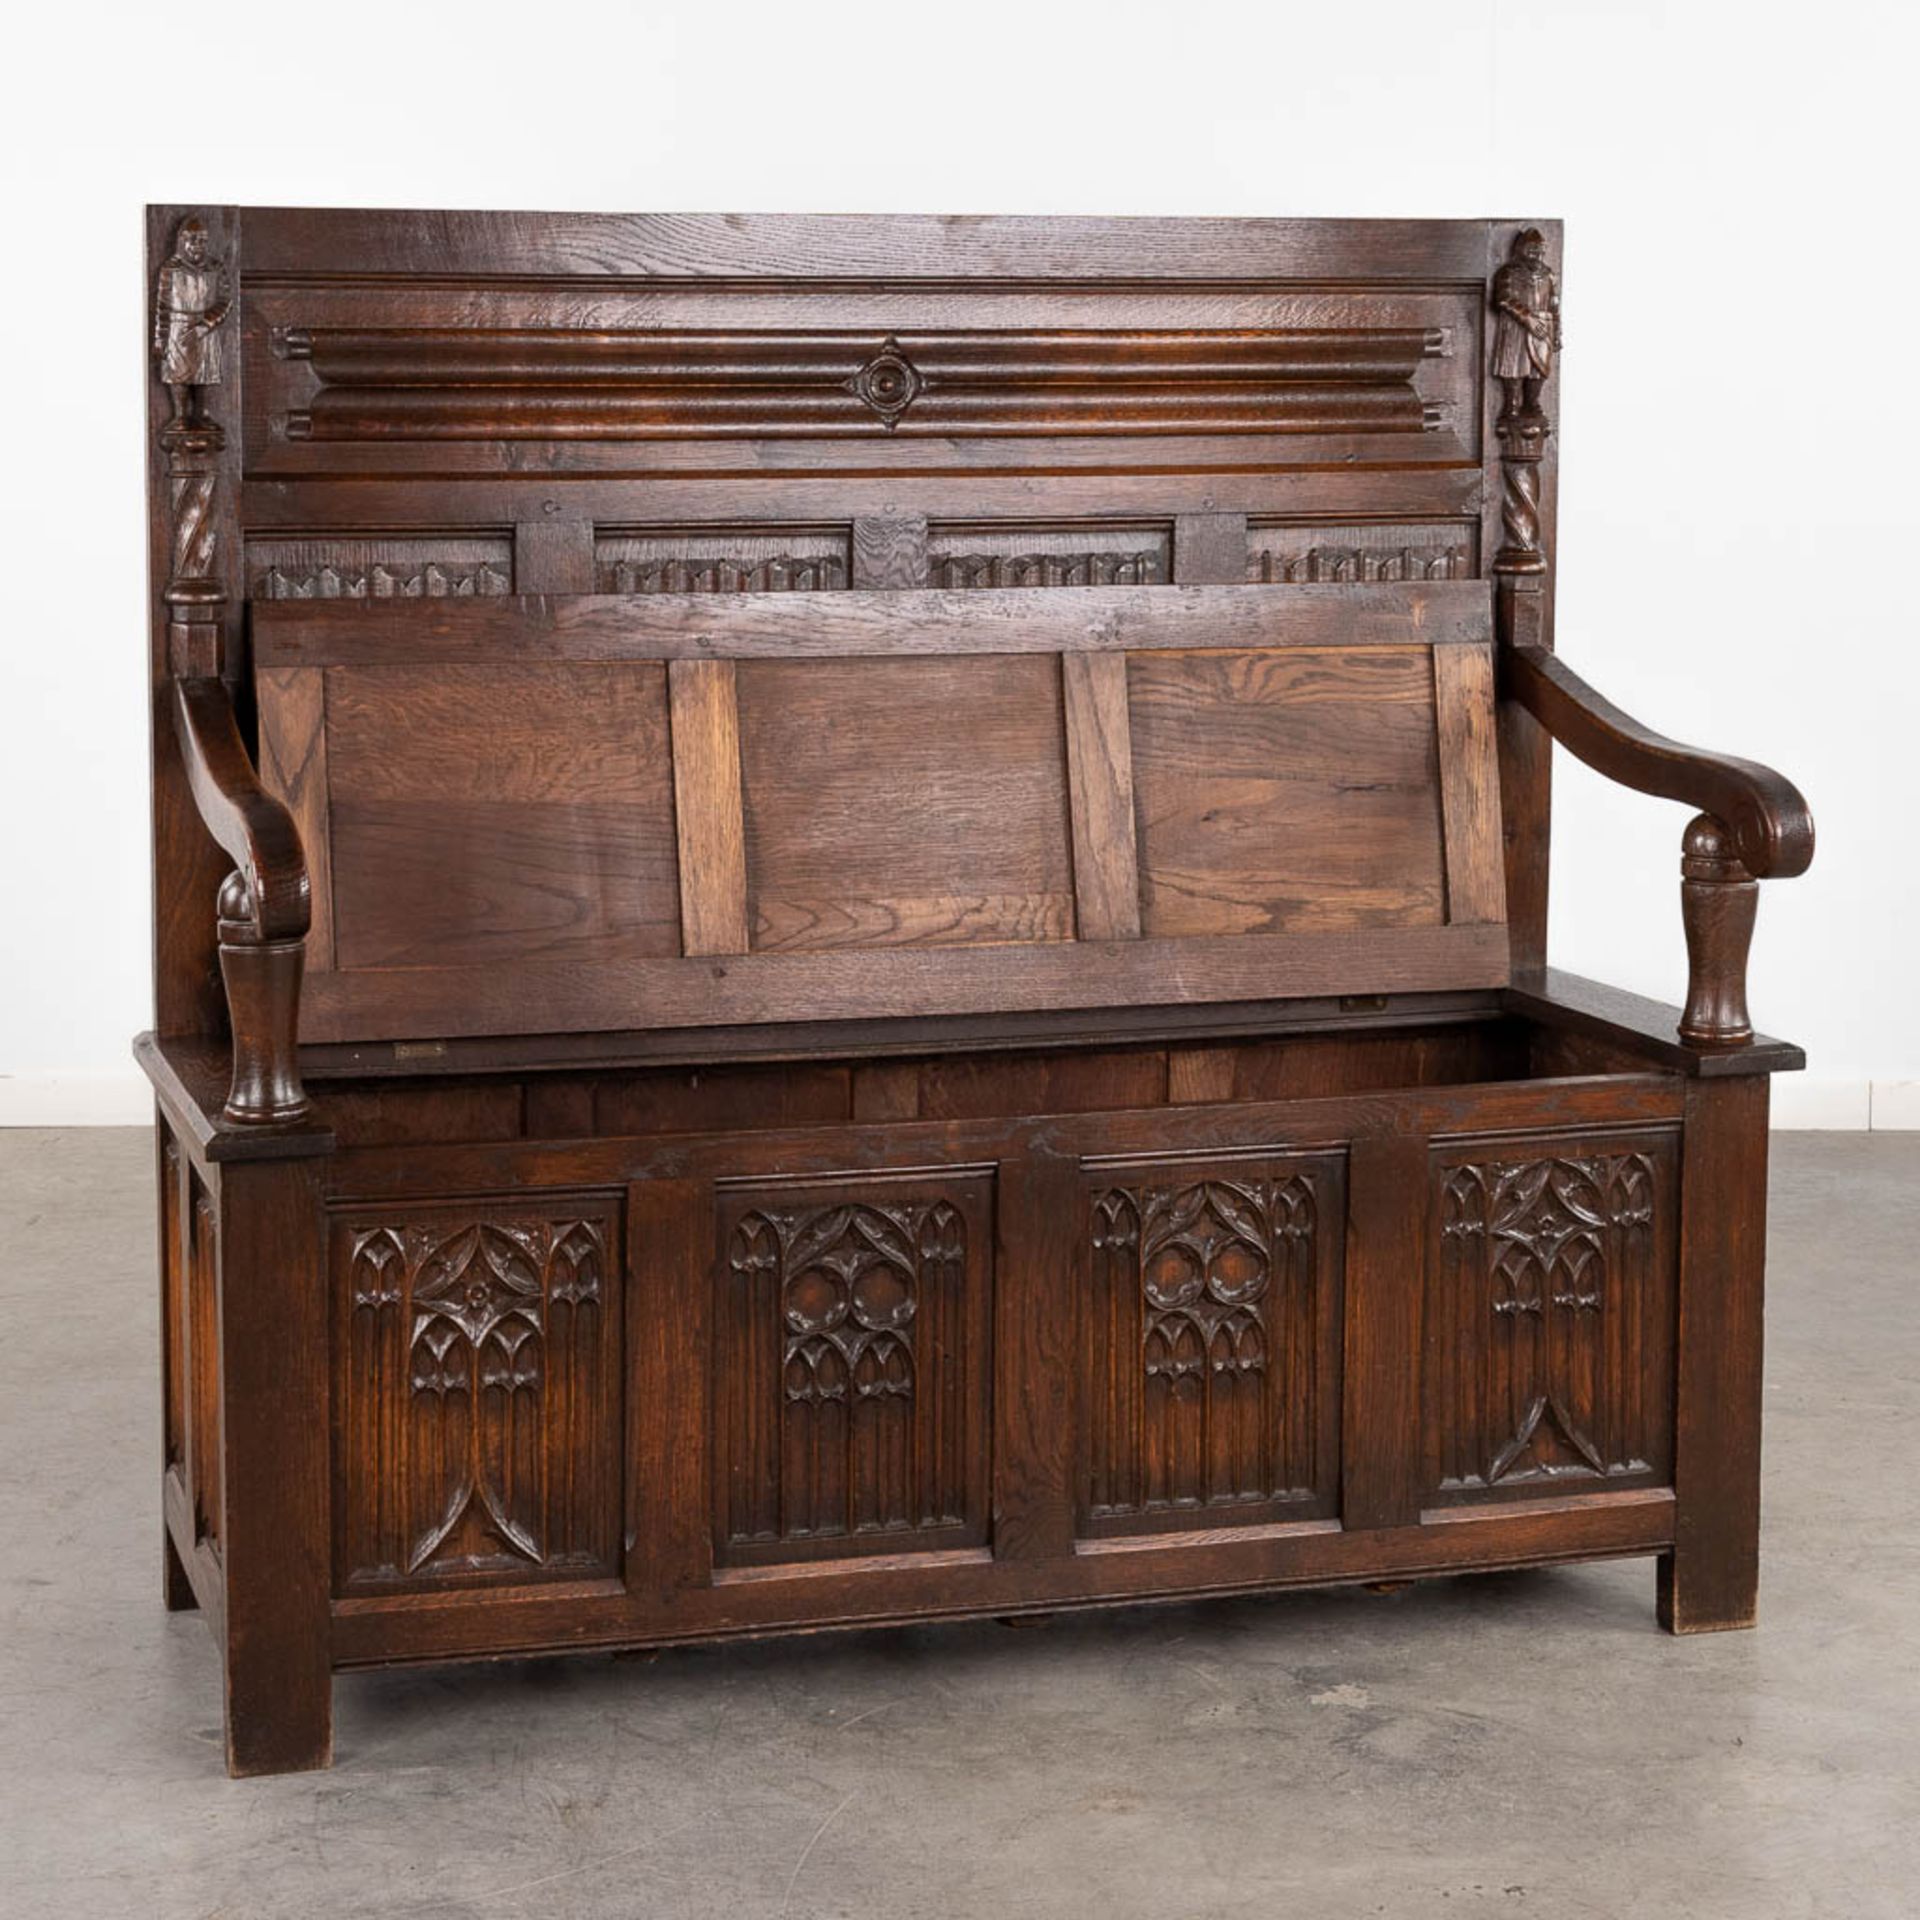 A hallbench with wood sculptures, oak, Gothic Revival. (D:54 x W:132 x H:120 cm) - Image 3 of 15